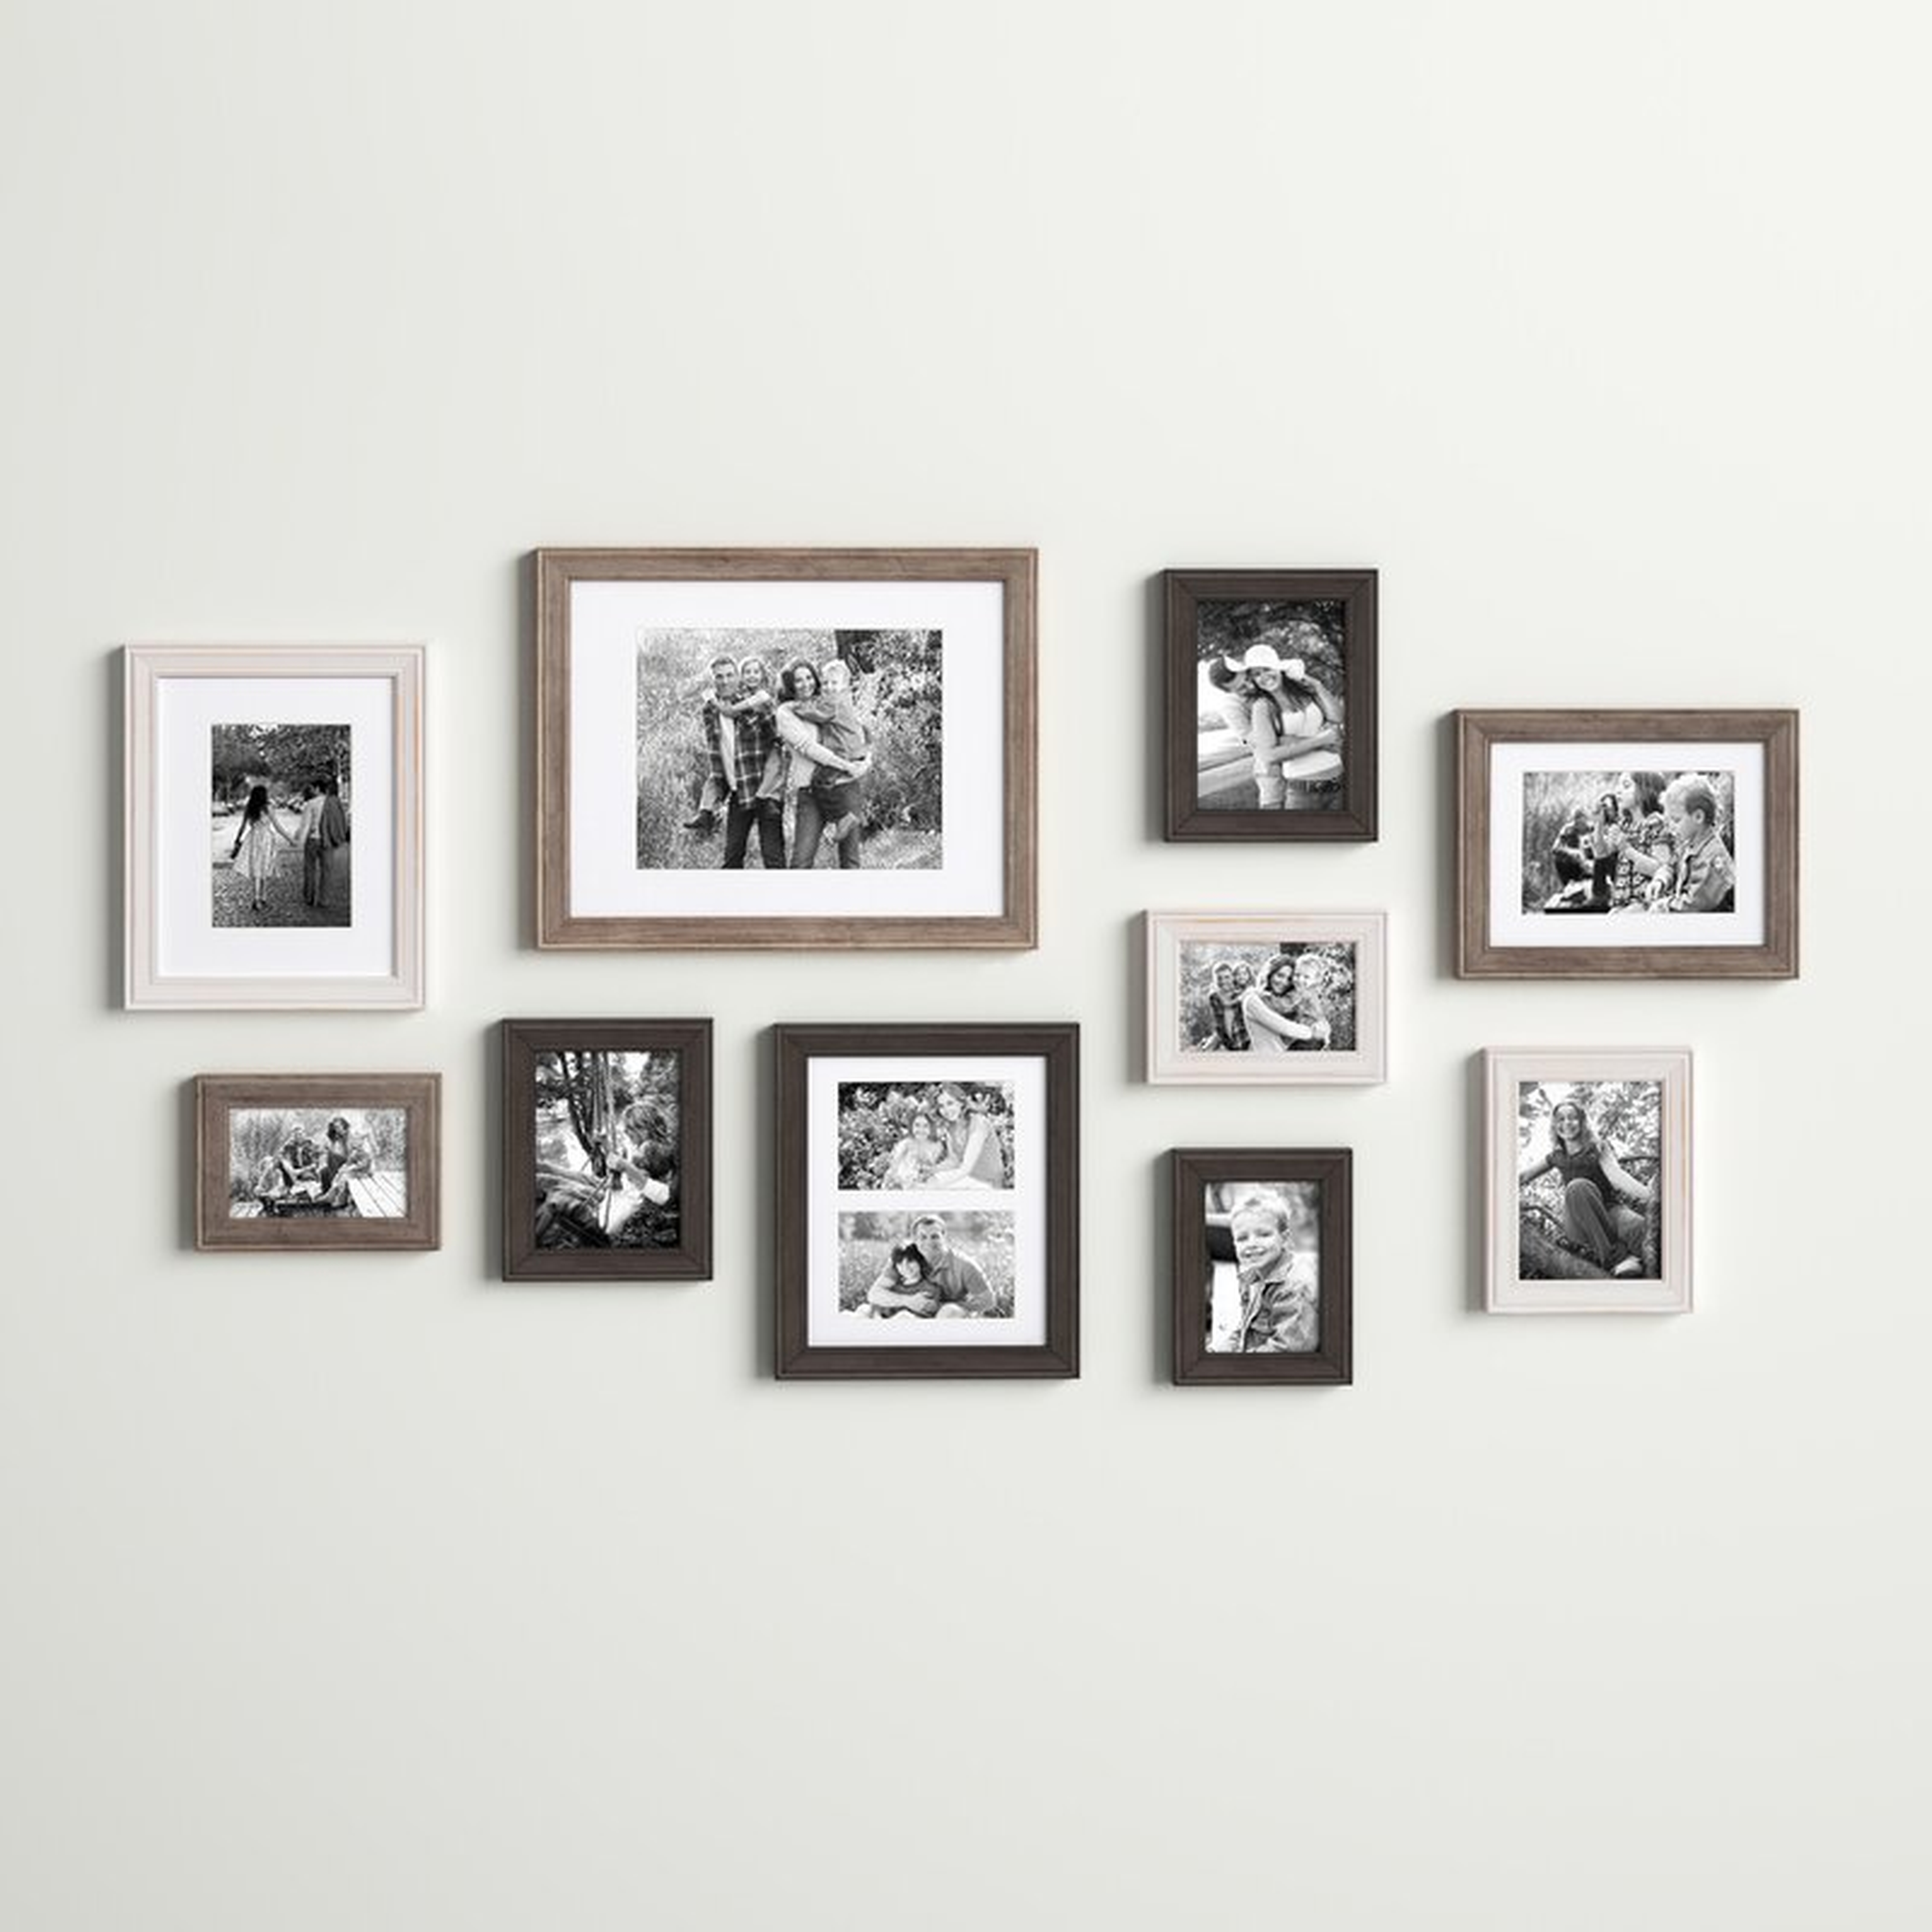 Rayburn Wood Gallery Picture Frame - Set of 10 - Wayfair